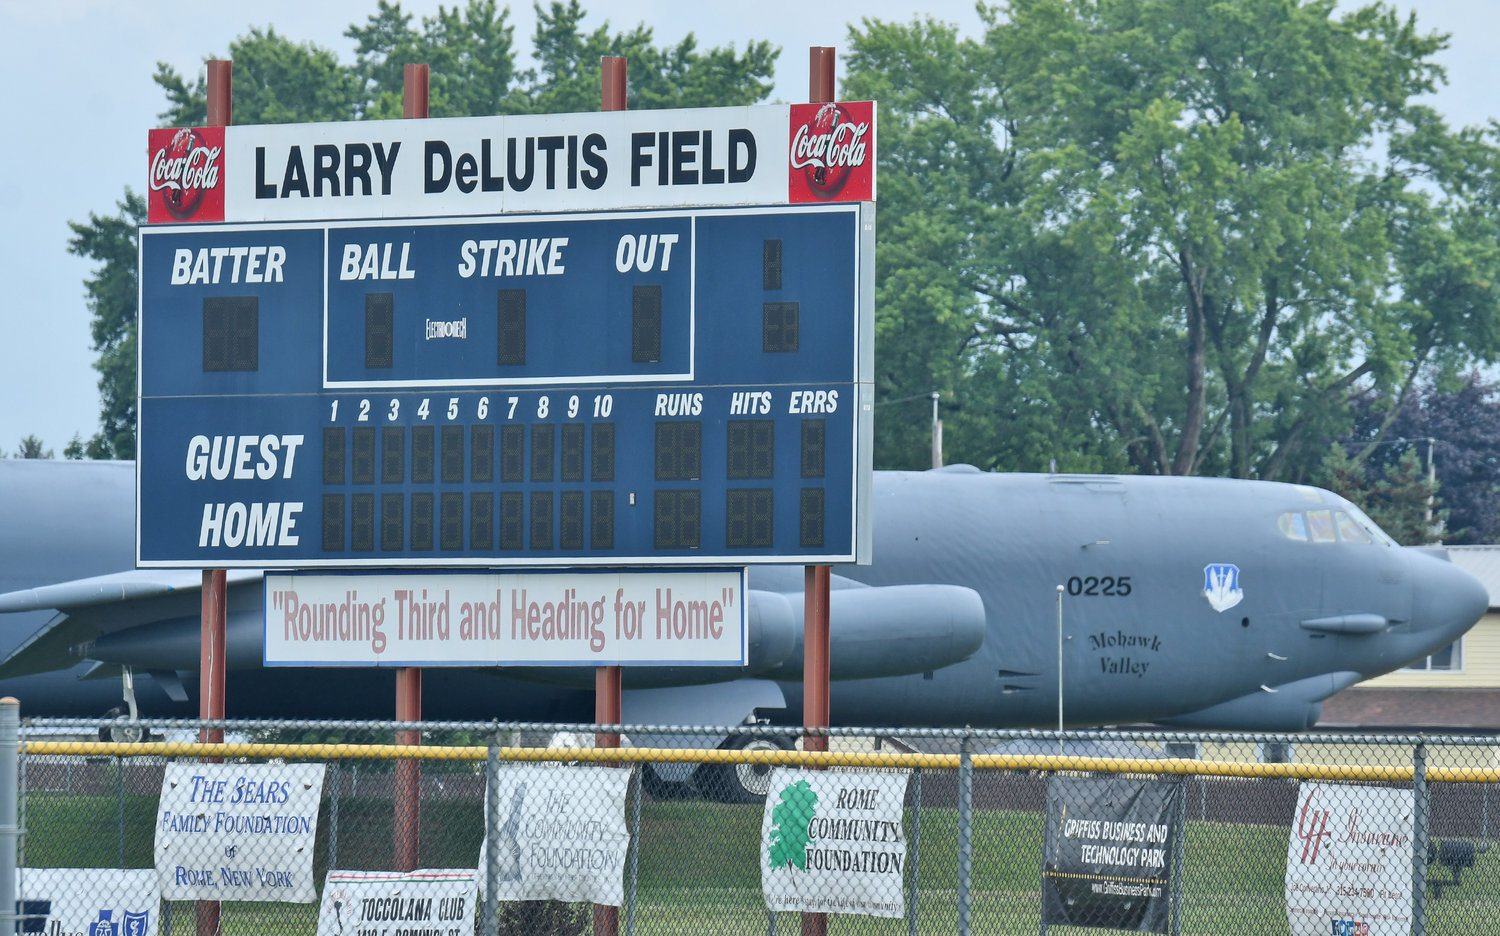 Larry DeLutis Field in Rome will be the host of Tuesday’s District V American Legion championship. Whitestown Post is undefeated in the tournament and will take on Smith Post of Rome at 5:15 p.m. Whitestown needs one win but Smith must win two times to come back from the elimination bracket and take its third straight district title. The team won the last two by beating Whitestown in 2019 and 2021, with the 2020 season canceled due to the pandemic.